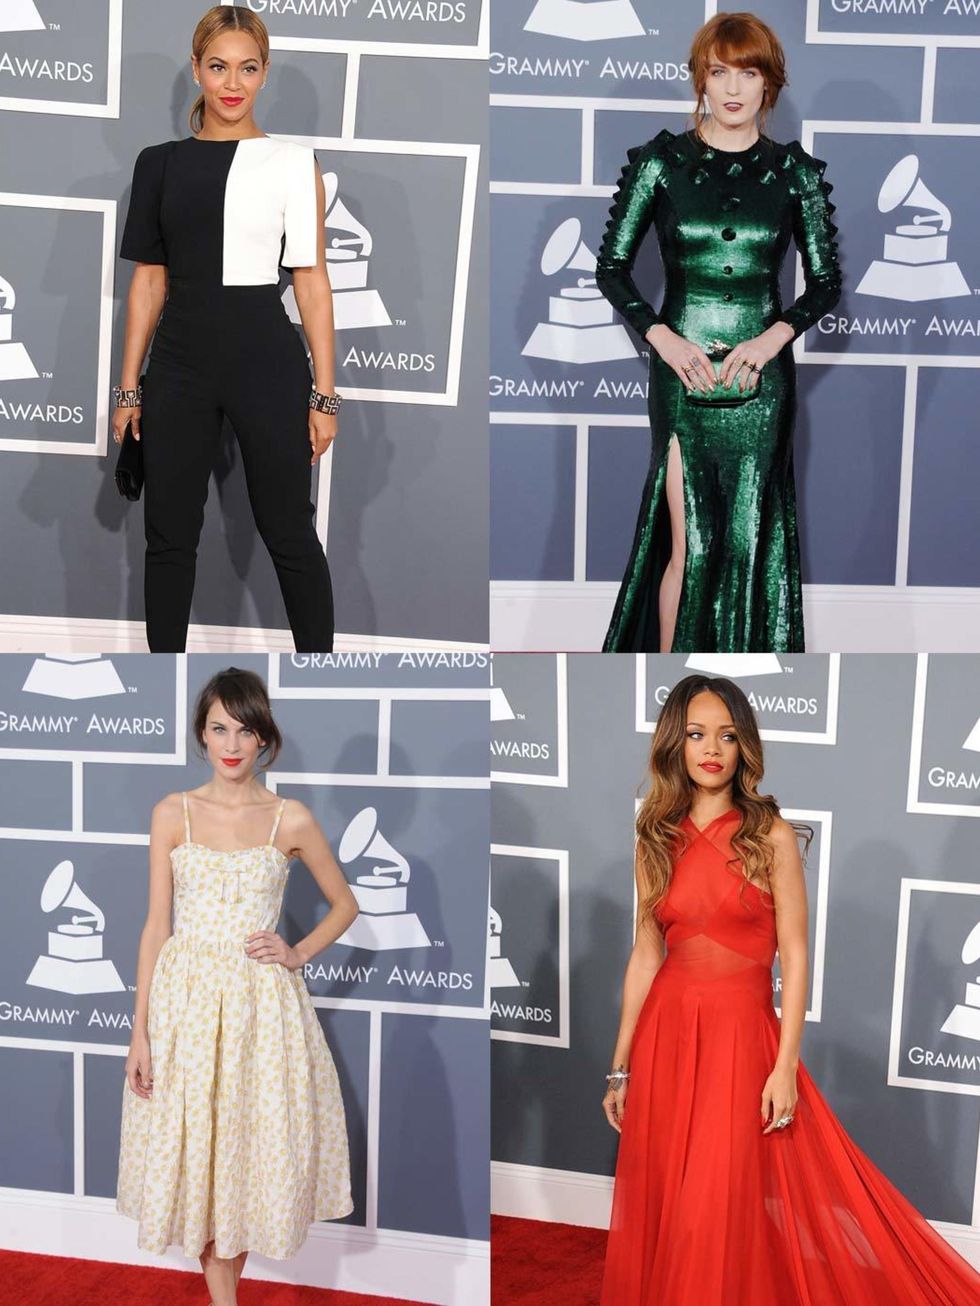 <p>While Hollywood hit London for the <a href="http://www.elleuk.com/fashion/news/bafta-2013-winners-red-carpet-fashion">BAFTAs</a> last night, the music industry has their moment on the red carpet at the Grammy Awards. Adele, Florence and Alexa flew the 